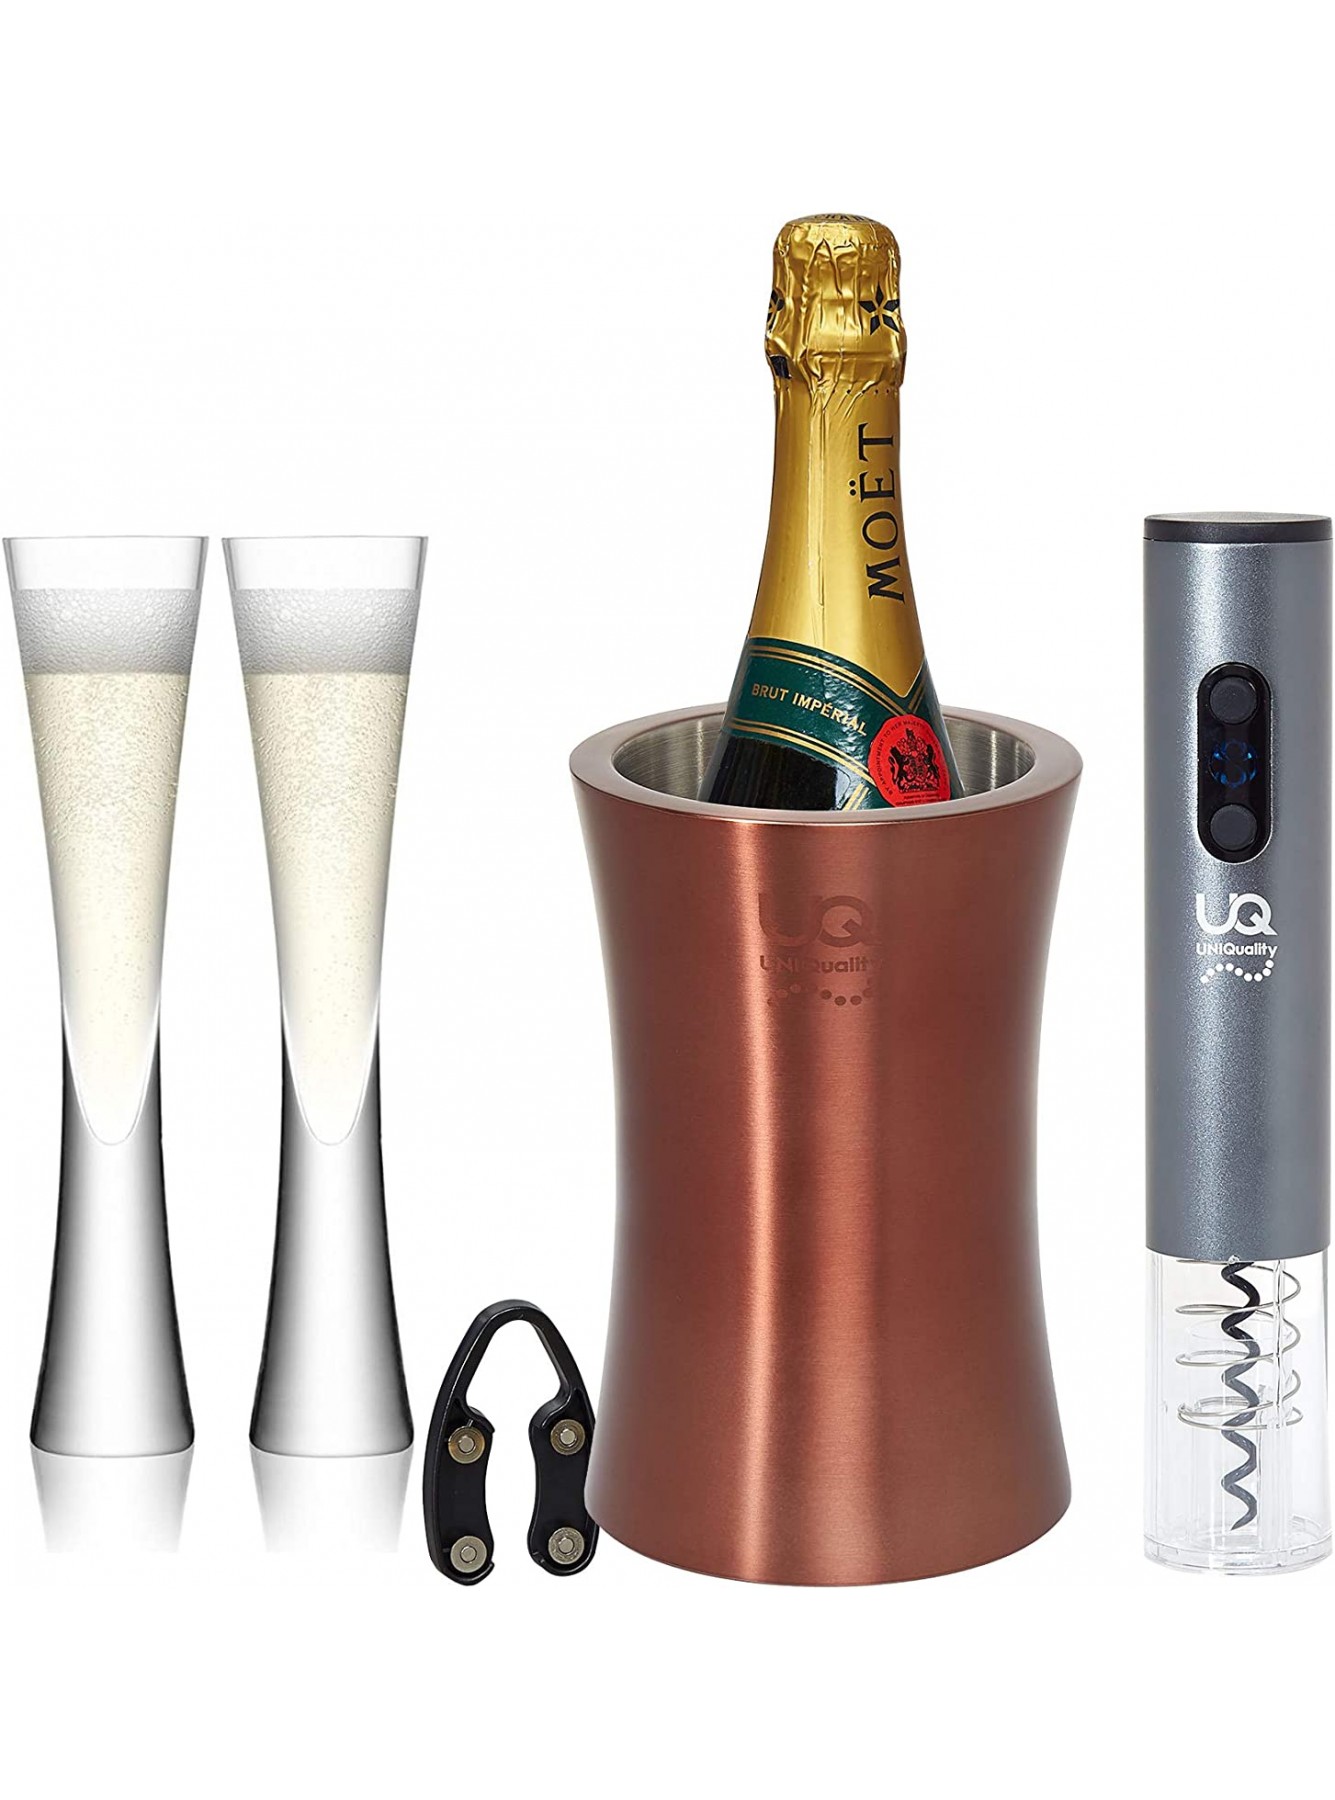 Wine Bottle Cooler with Electric Wine Bottle opener and Foil cutter set. Premium wine gift box. Elegant Stainless steel Champagne bucket. Birthday Wine gifts. Mothers Day gift B08DNLVKLY